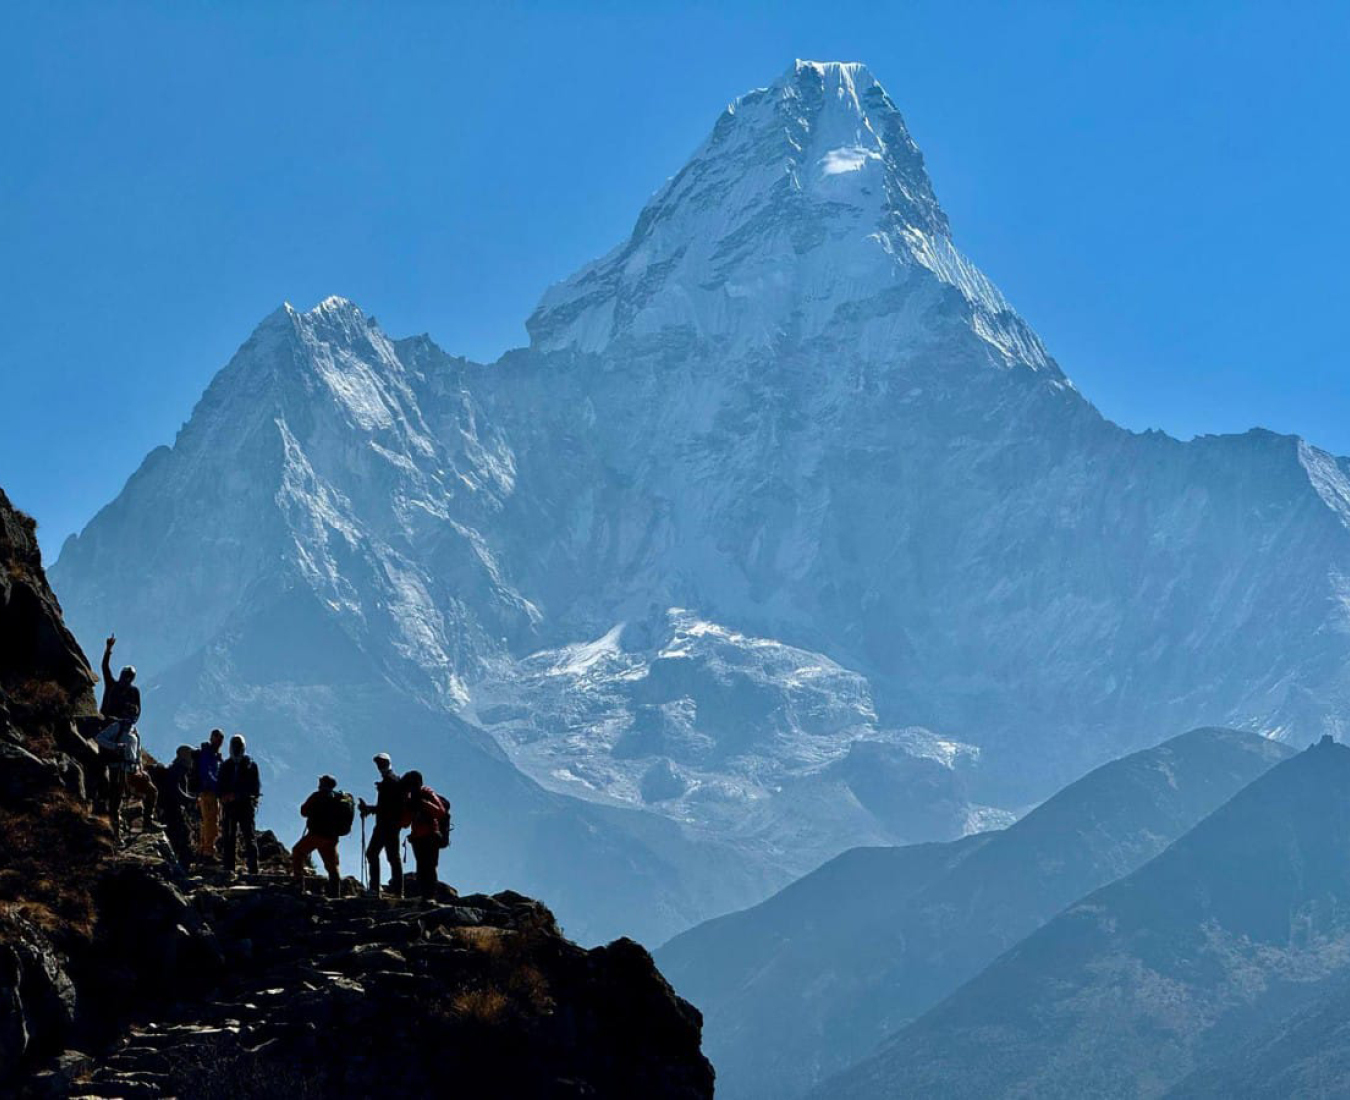 Trekkers overshadowed by the immense profile of Mount Ama Dablam on the trail.